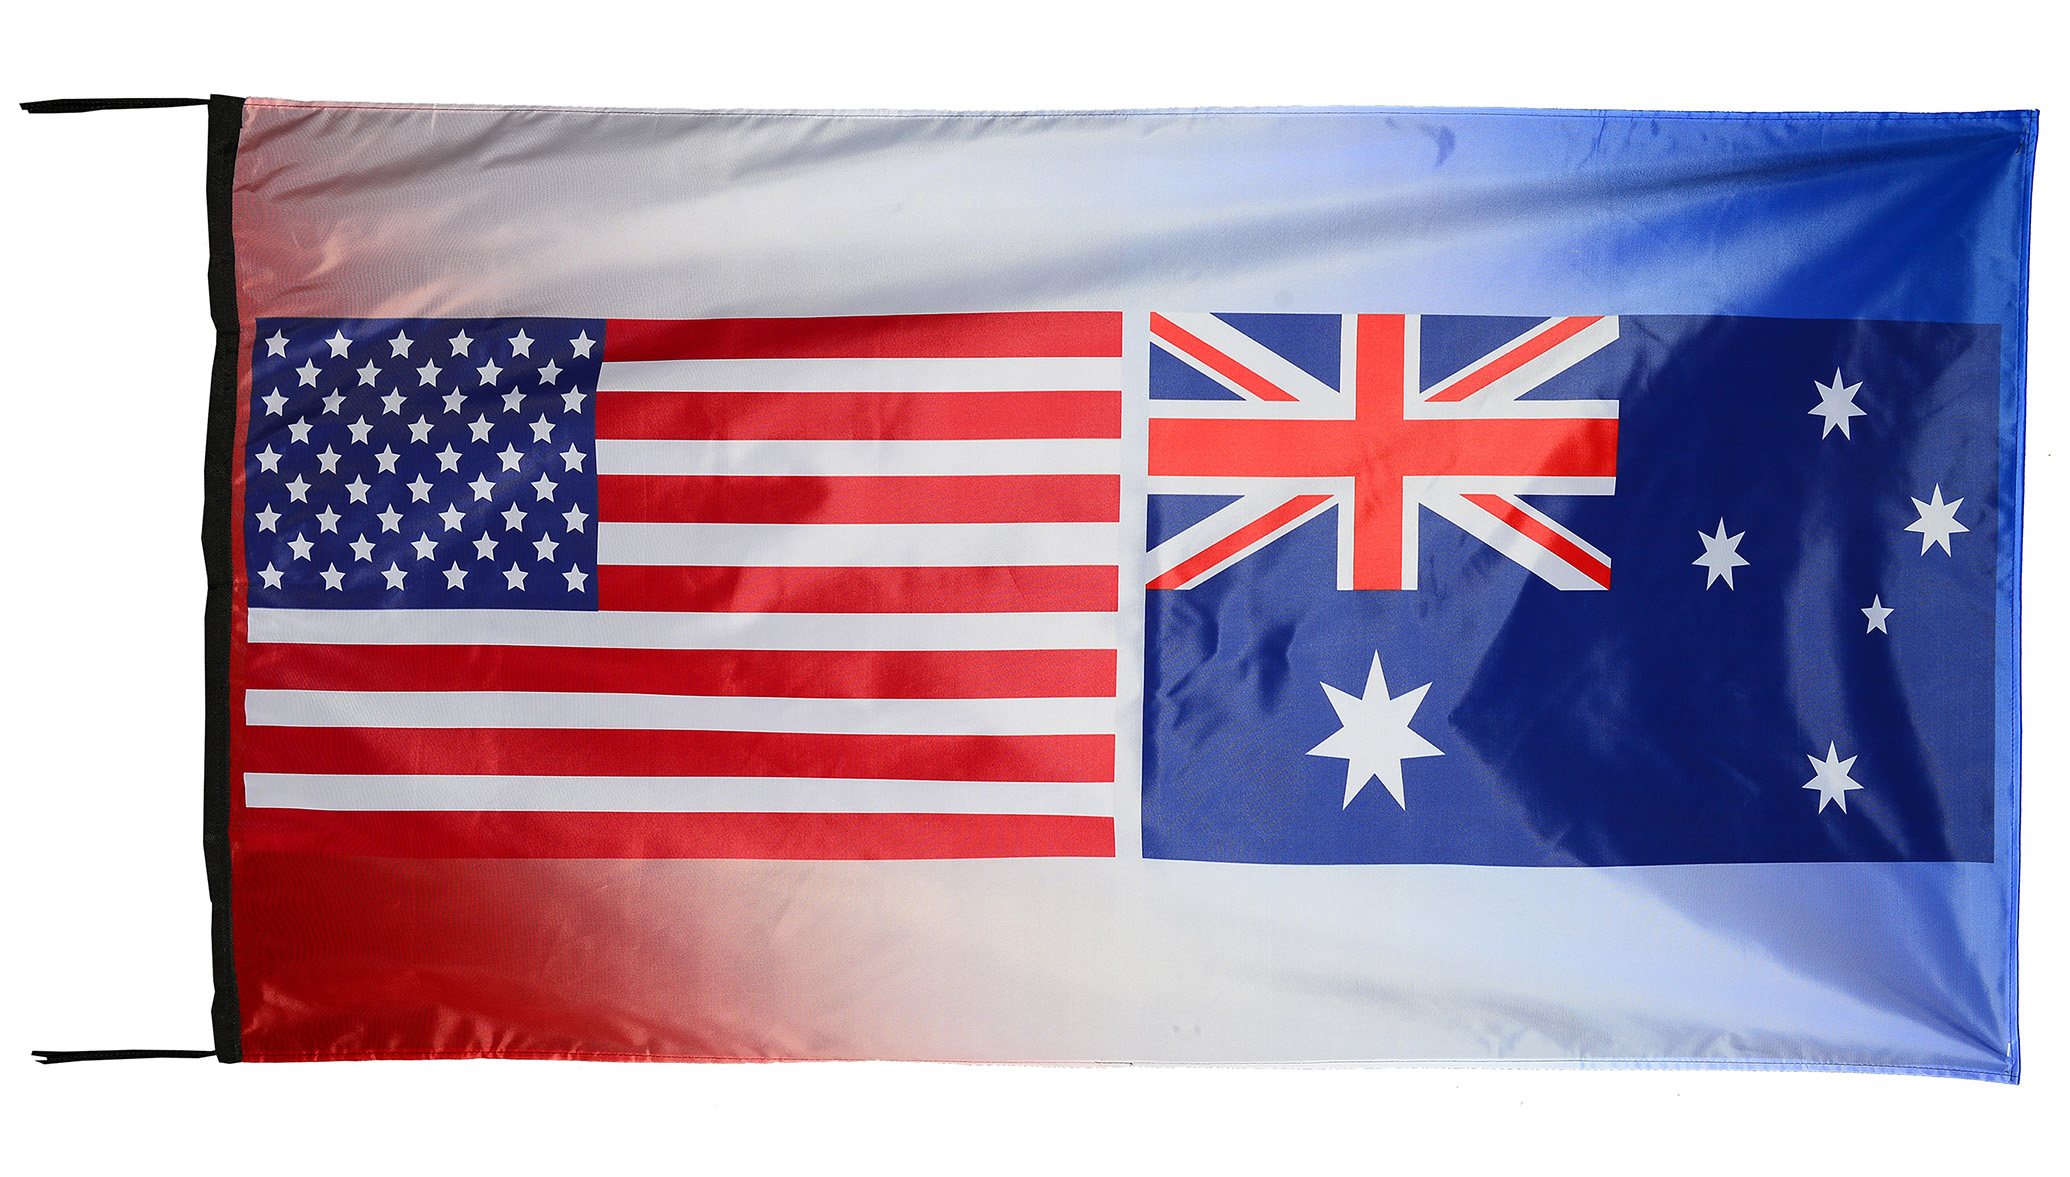 Flag  063 USA / US Country / United States Of America and Australia / Patriotic / Pride Hybrid Weather-Resistant Polyester Outdoor Flag Landscape Banner / Vivid Colors / 3 X 5 FT (150 x 90cm) International Flags for Sale